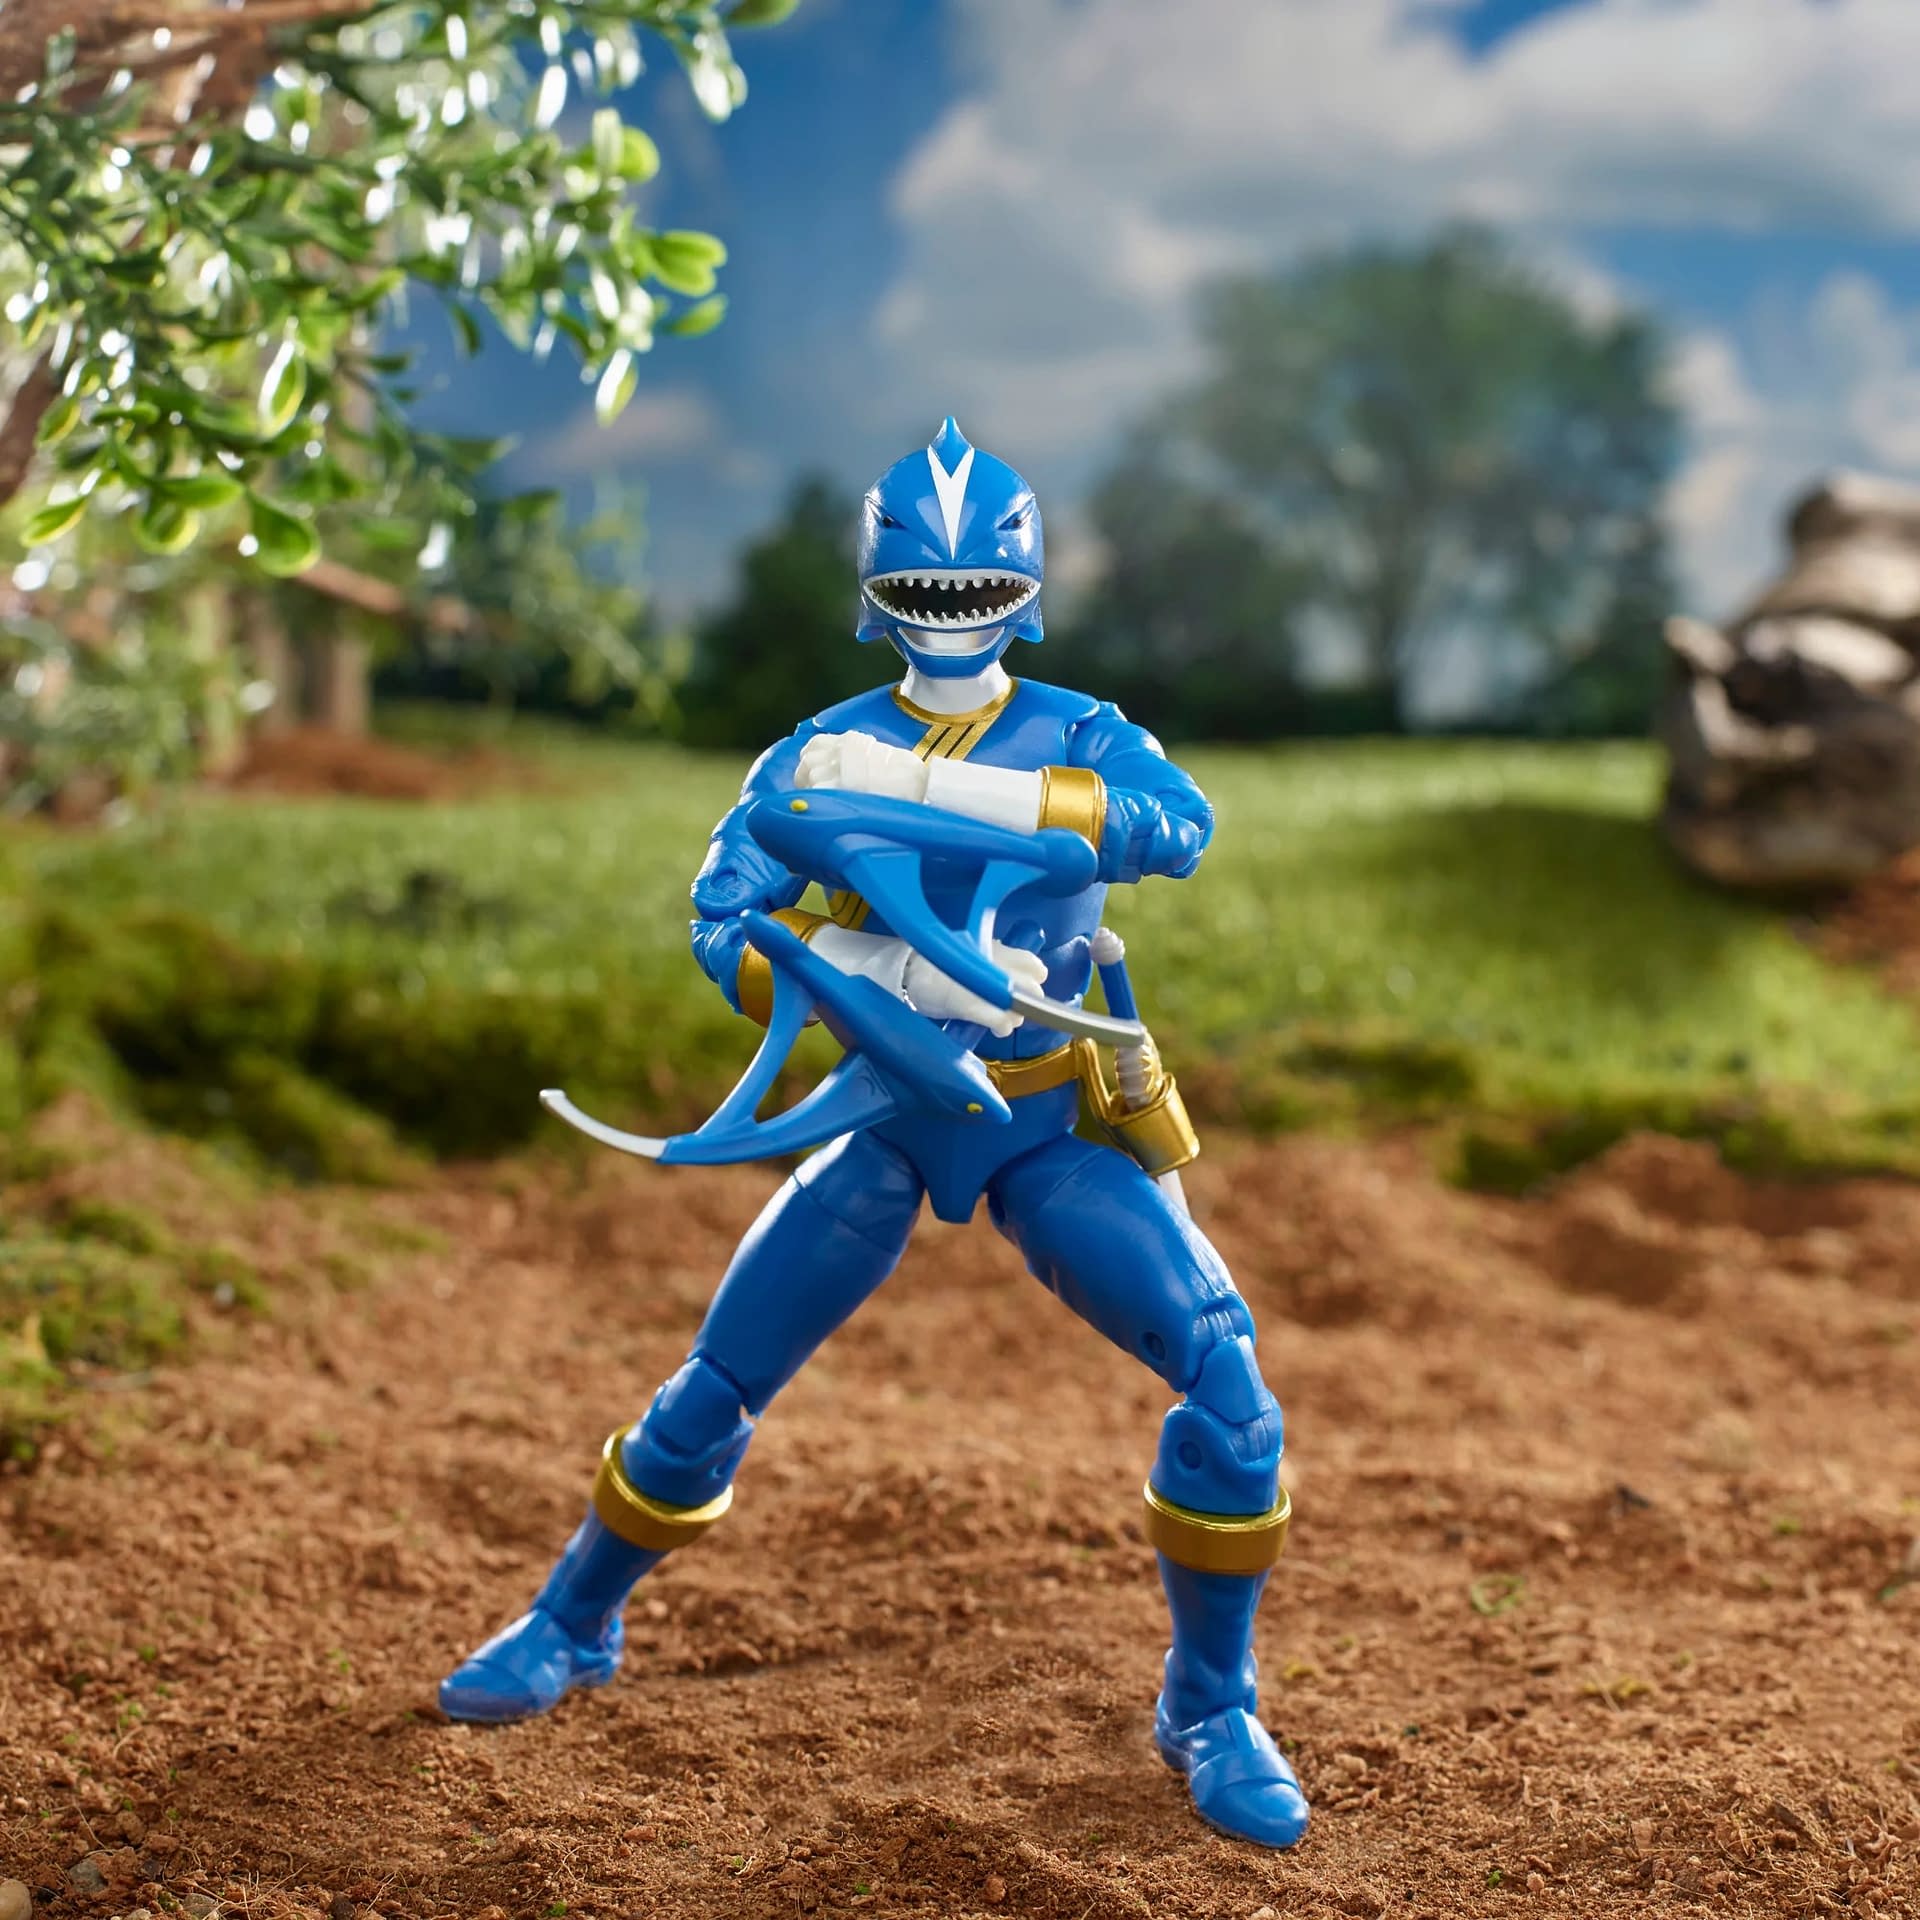 Hasbro Debuts New Power Rangers Figure with Blue Wild Force Ranger